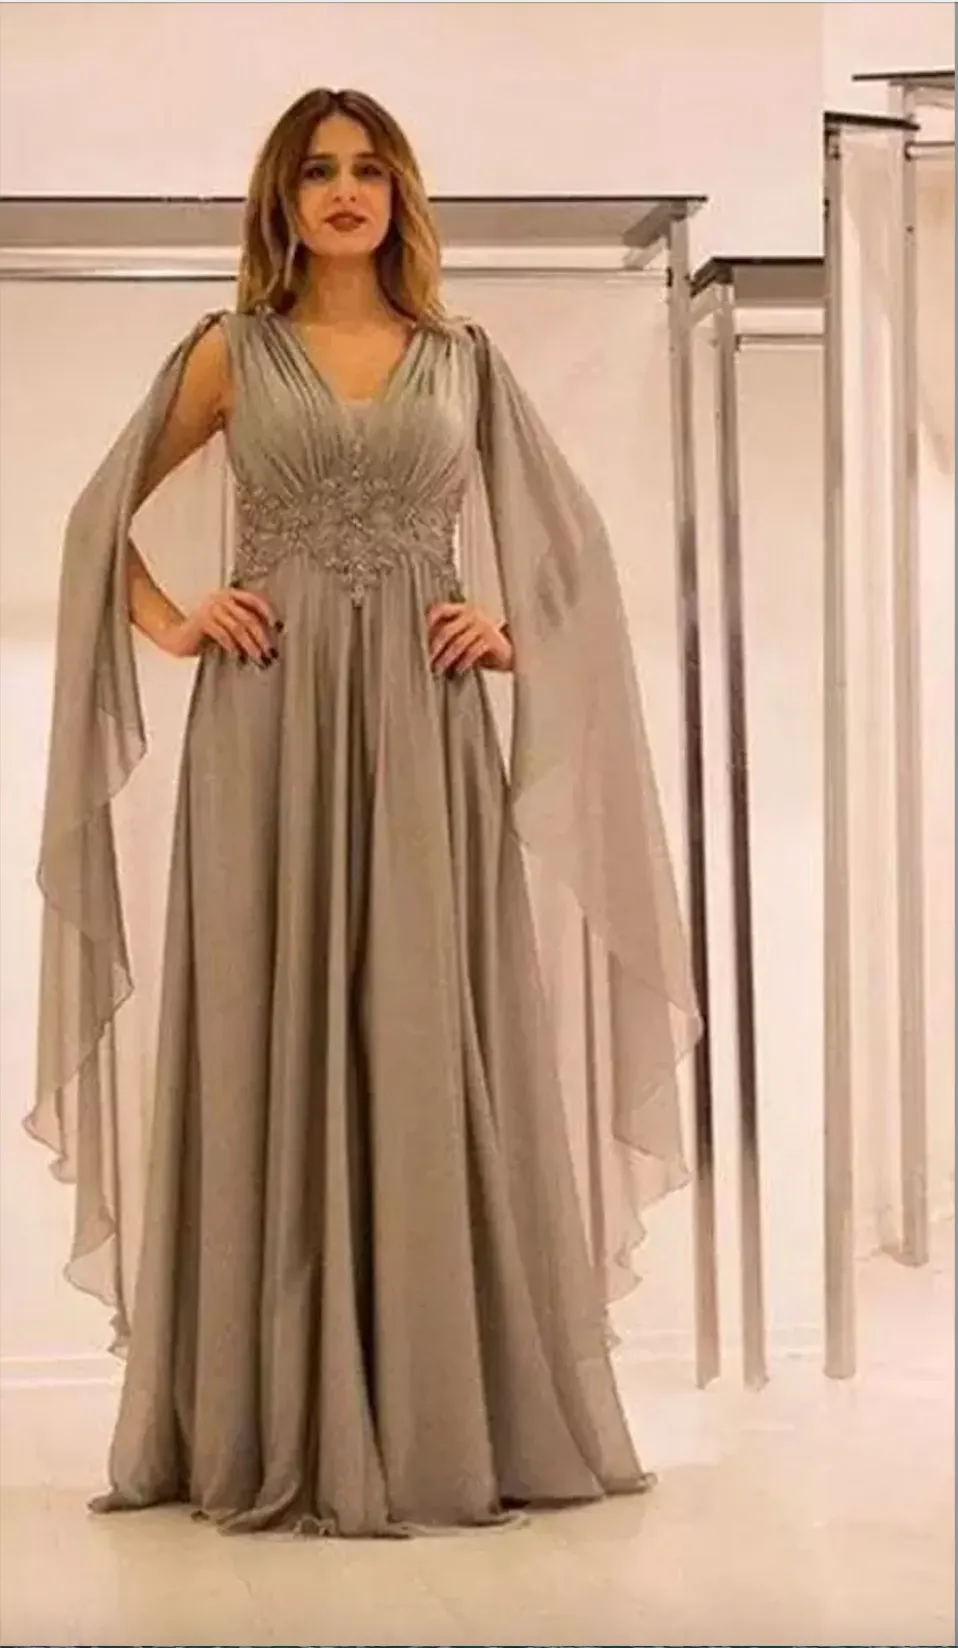 Chic Chiffon A Line Mother Of The Bride Dresses With Long Wraps Lace Appliques Beads V Neck Pleats Evening Prom Gowns Backless Floor Length Women Formal Wear